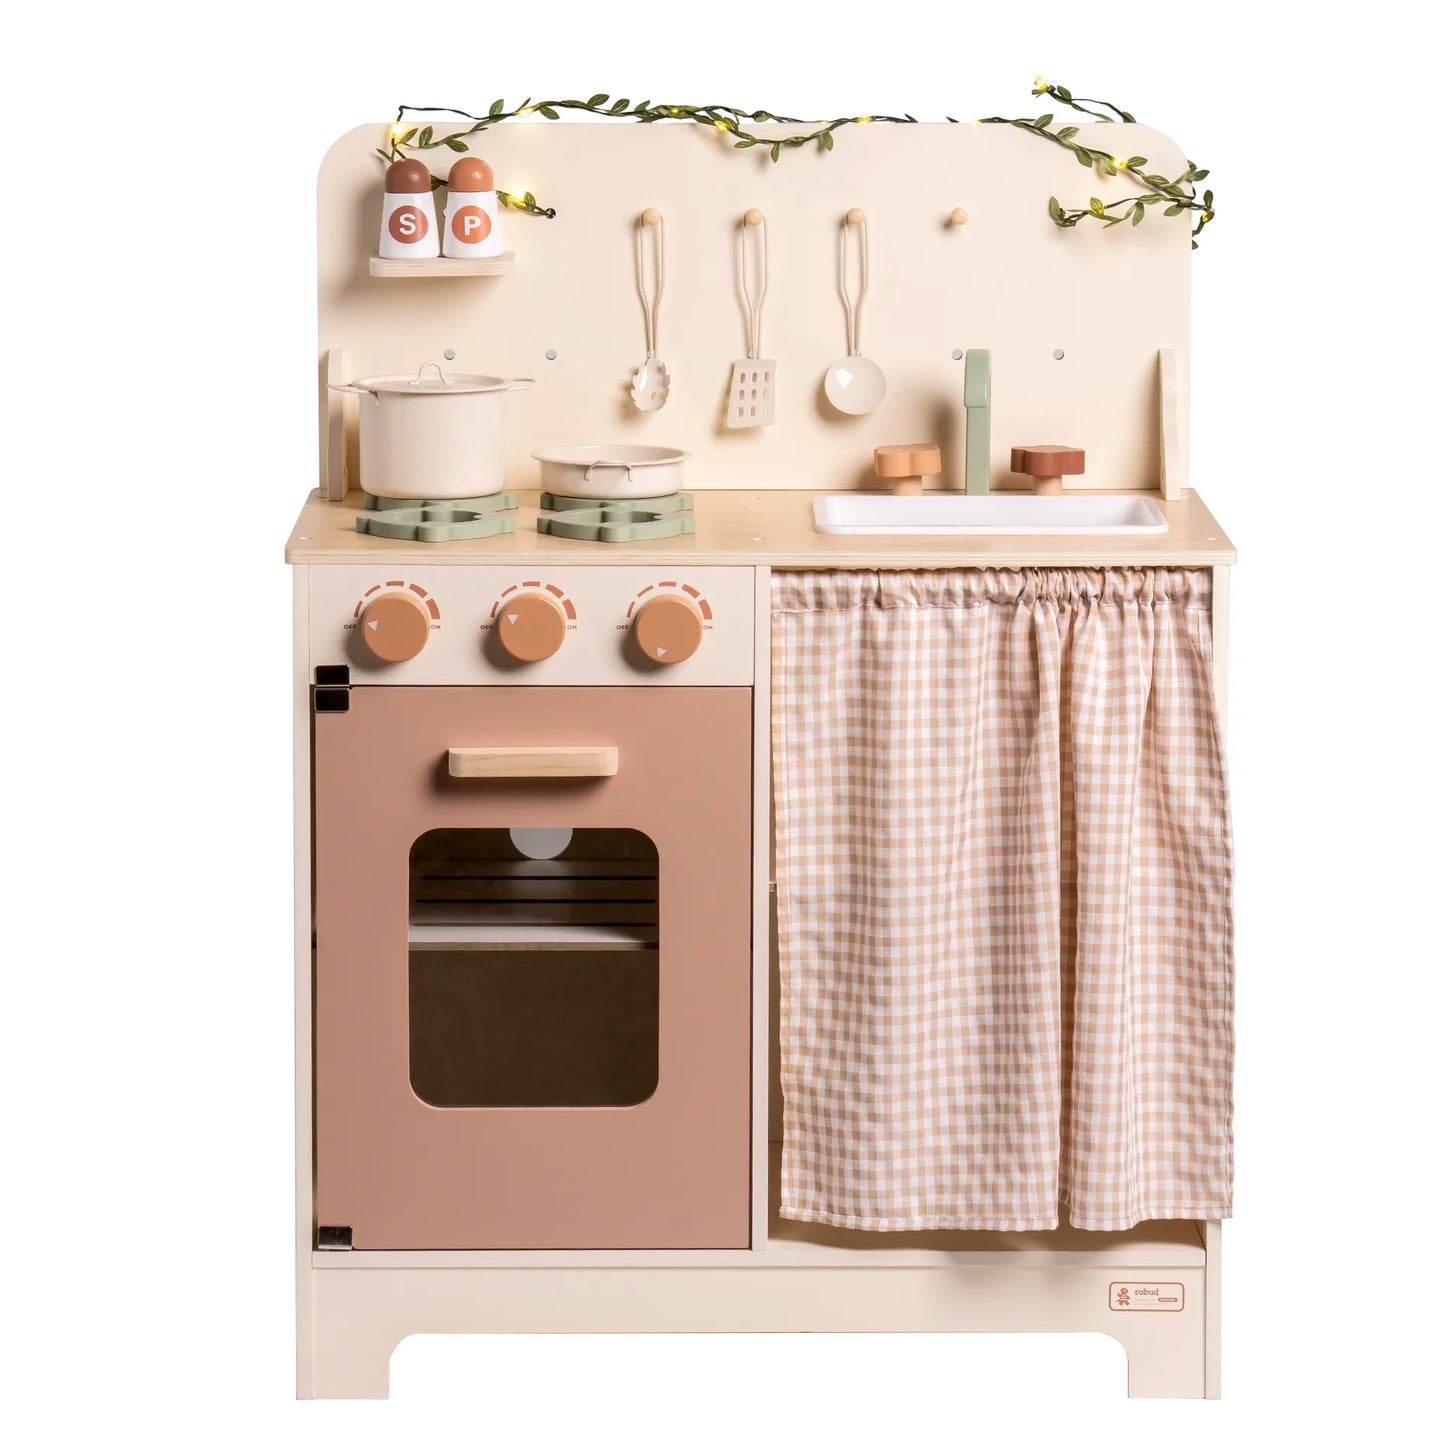 Kids Play Kitchen Set - Rustic Wooden Pretend Play Kitchen with Leaf Light String, Apron, and Groves, for Toddlers 3+  Wooden Play Kitchen - Budget Friendly